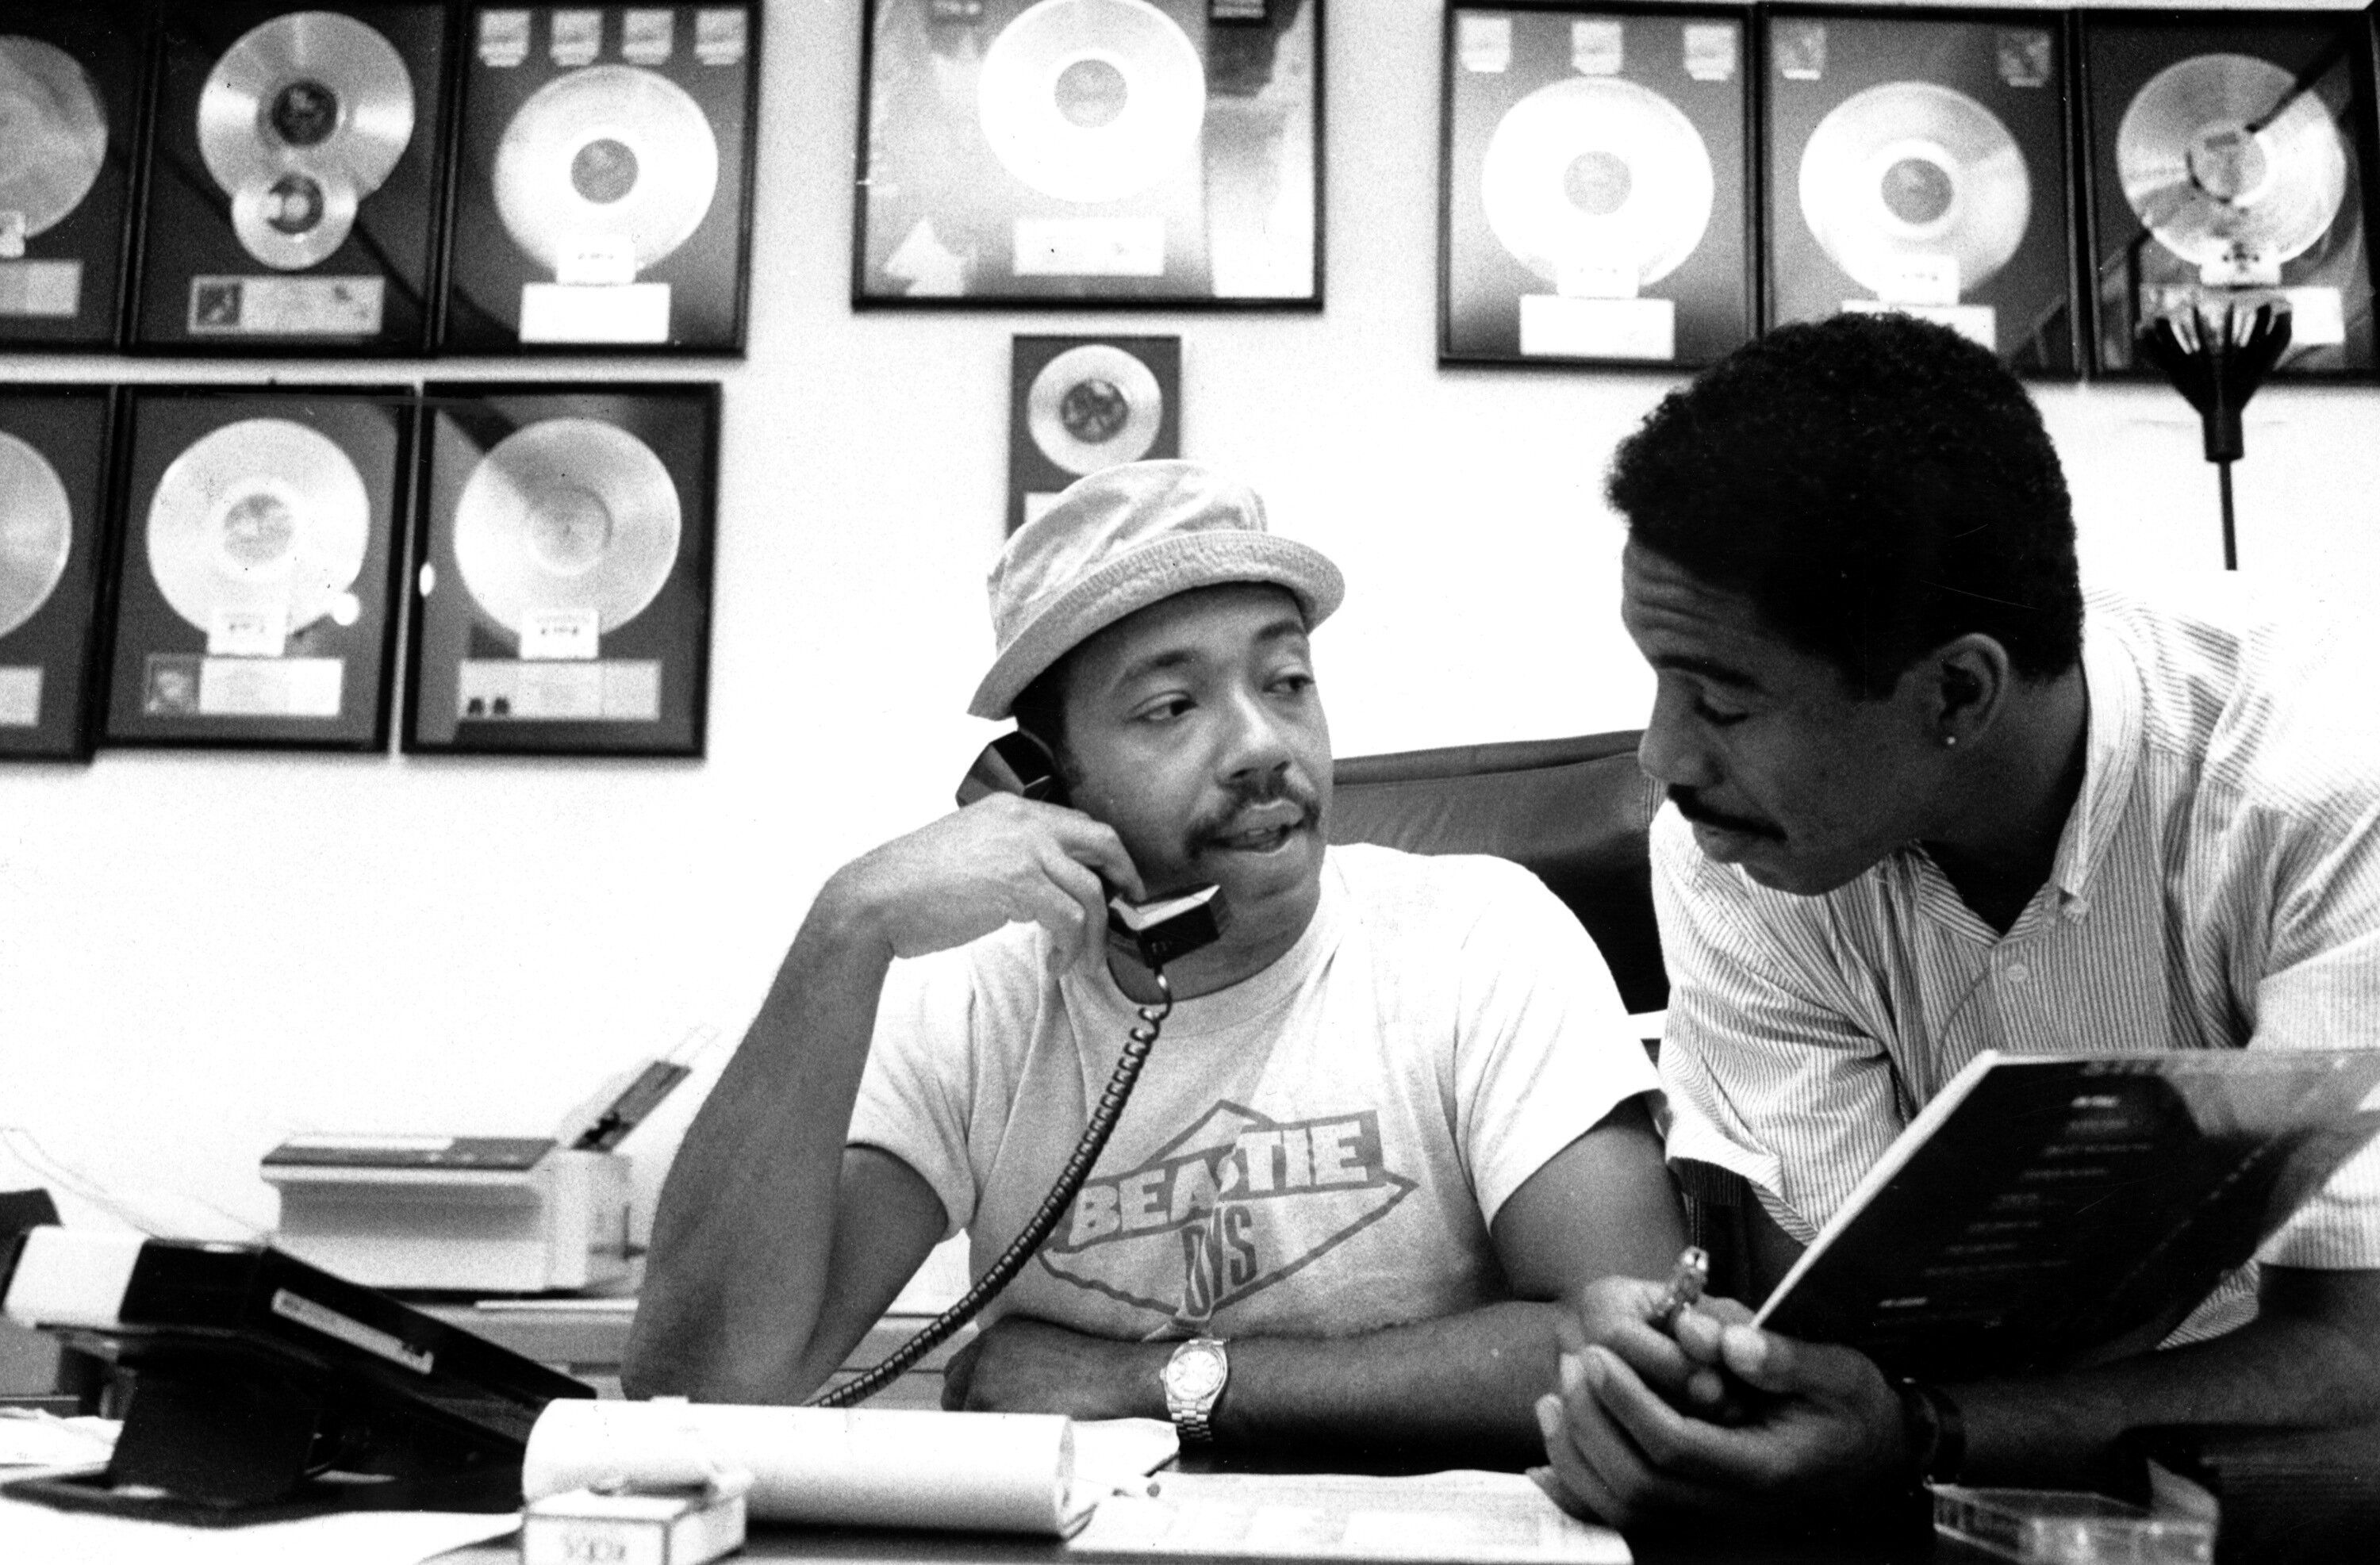 Record producer Russell Simmons with an associate at 111 Barrow St. "Simmons is rarely without hat or phone."